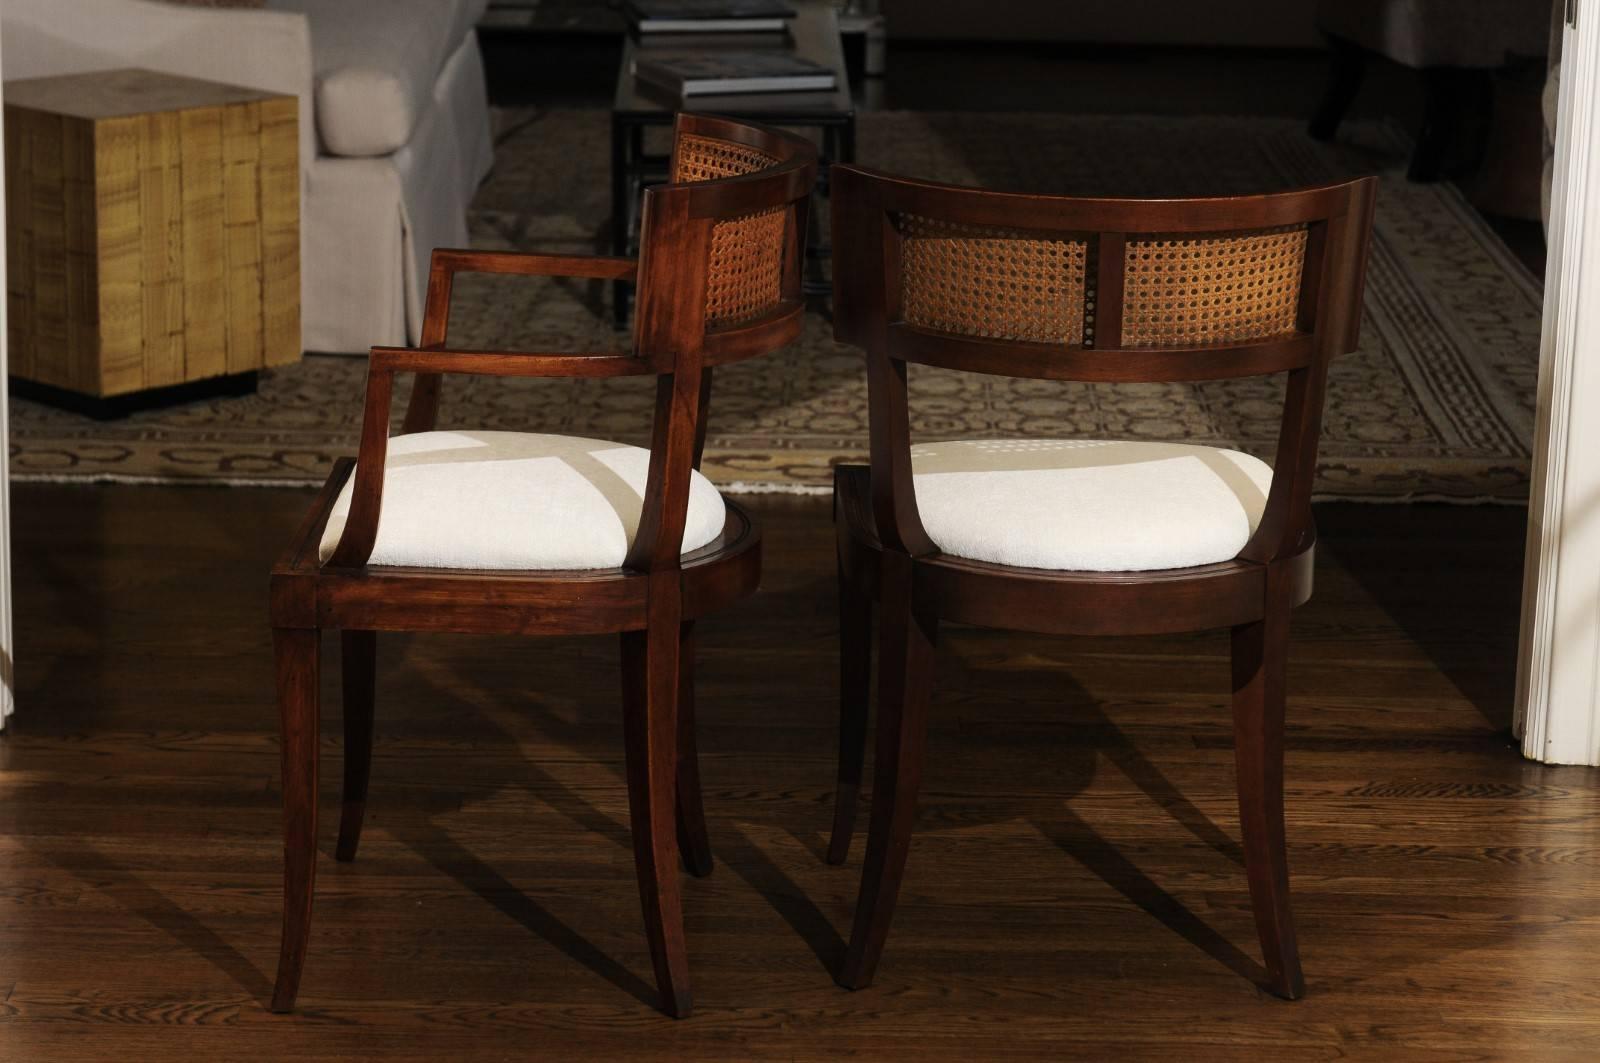 The rarest of the rare, an exceptional, meticulously restored set of fourteen (14) cane back Klismos dining chairs by Baker Furniture, circa 1958. A set of this magnitude is the collector's equivalent to capturing a Purple Unicorn. This design is